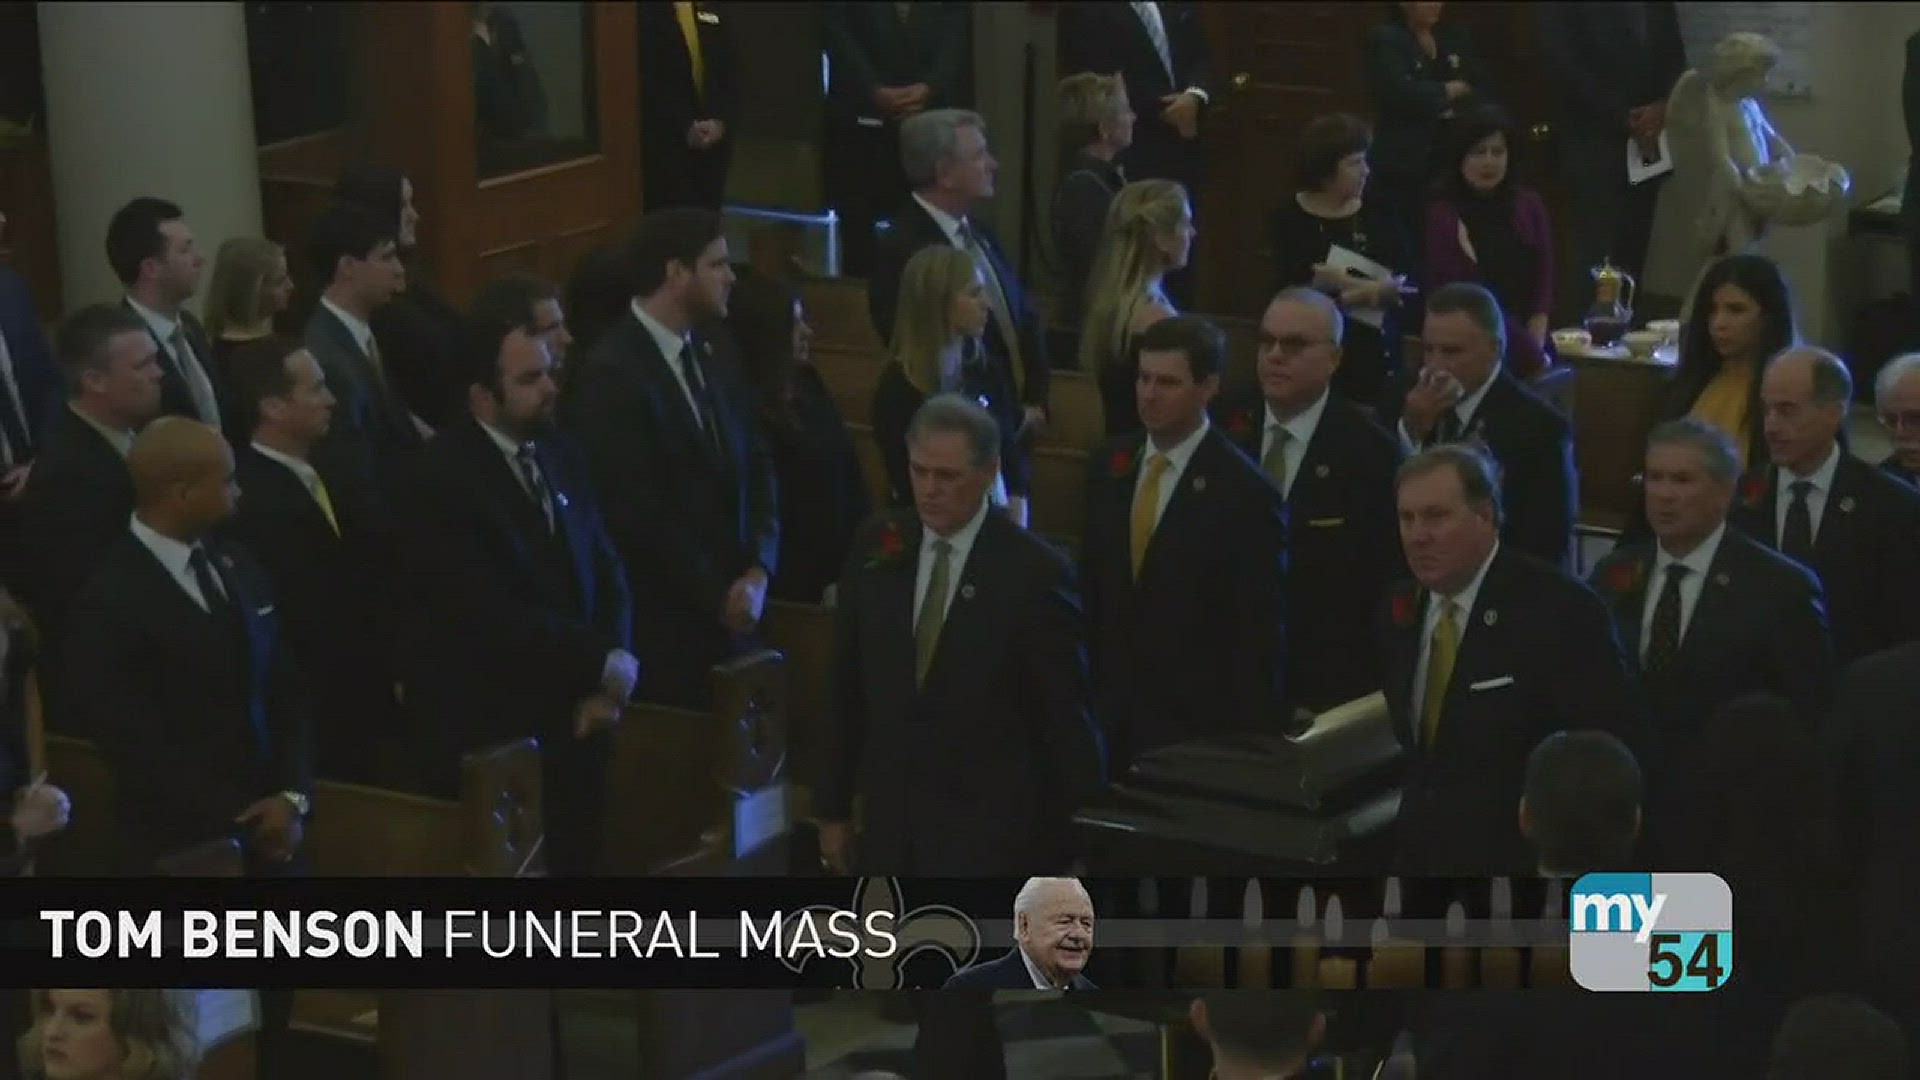 The entire funeral service for Tom Benson from St. Louis Cathedral.